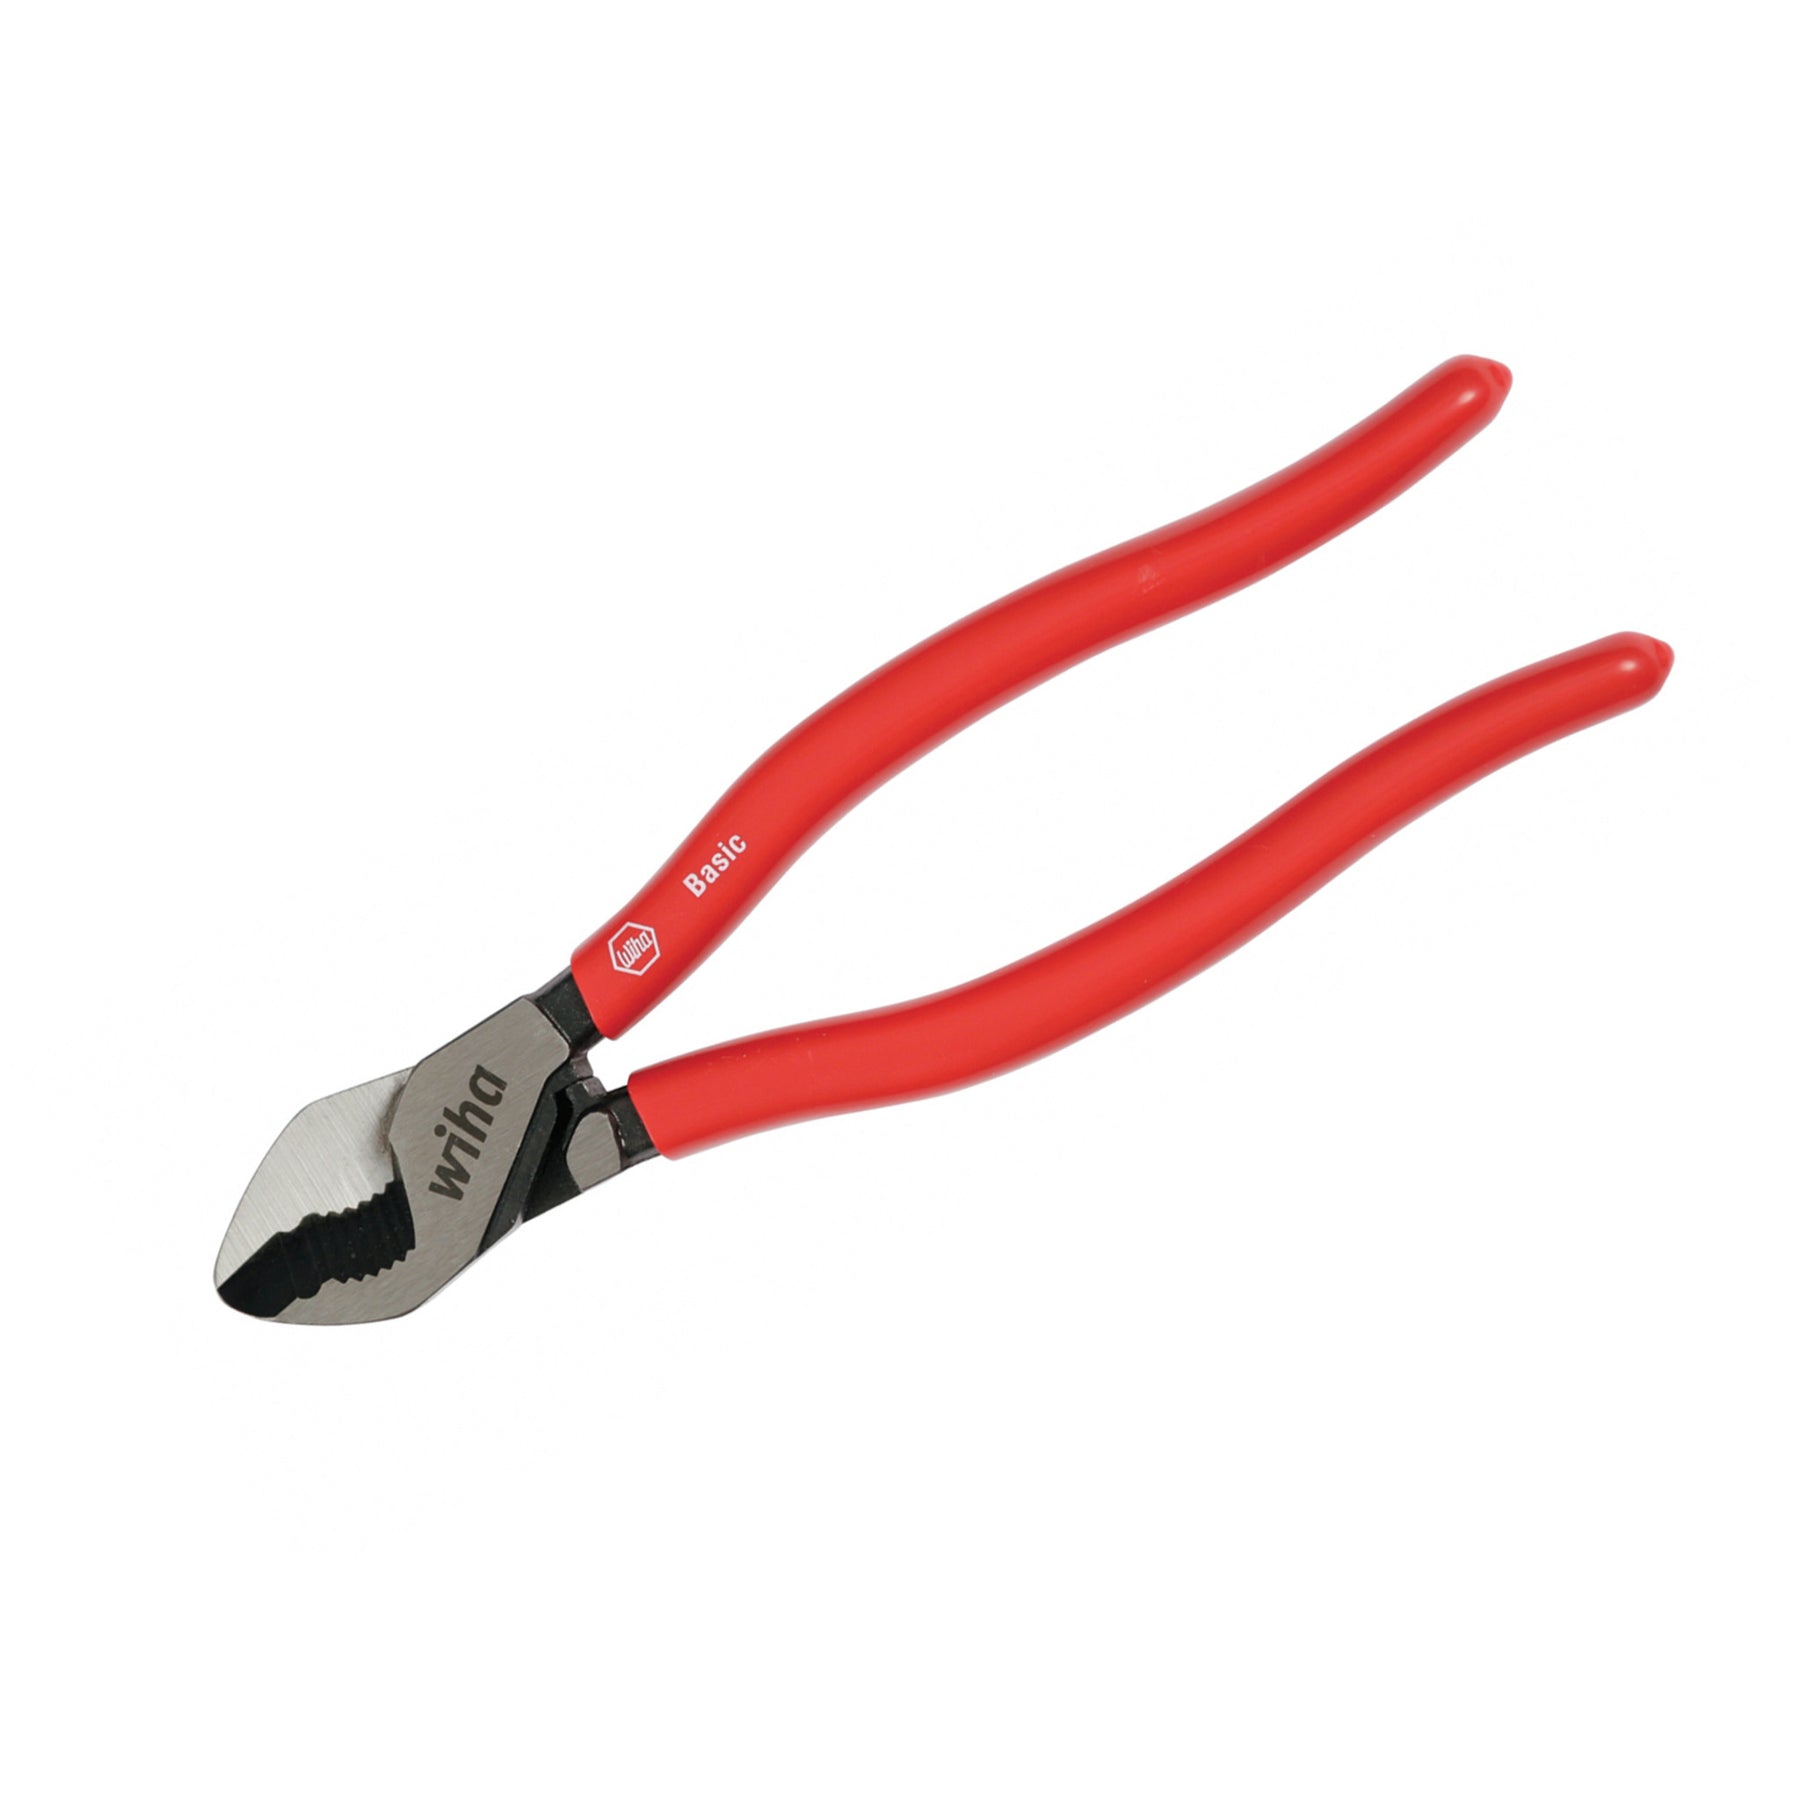 Wiha 43662 210mm Professional VDE Electrical Wire Cable Cutter Spring Plier